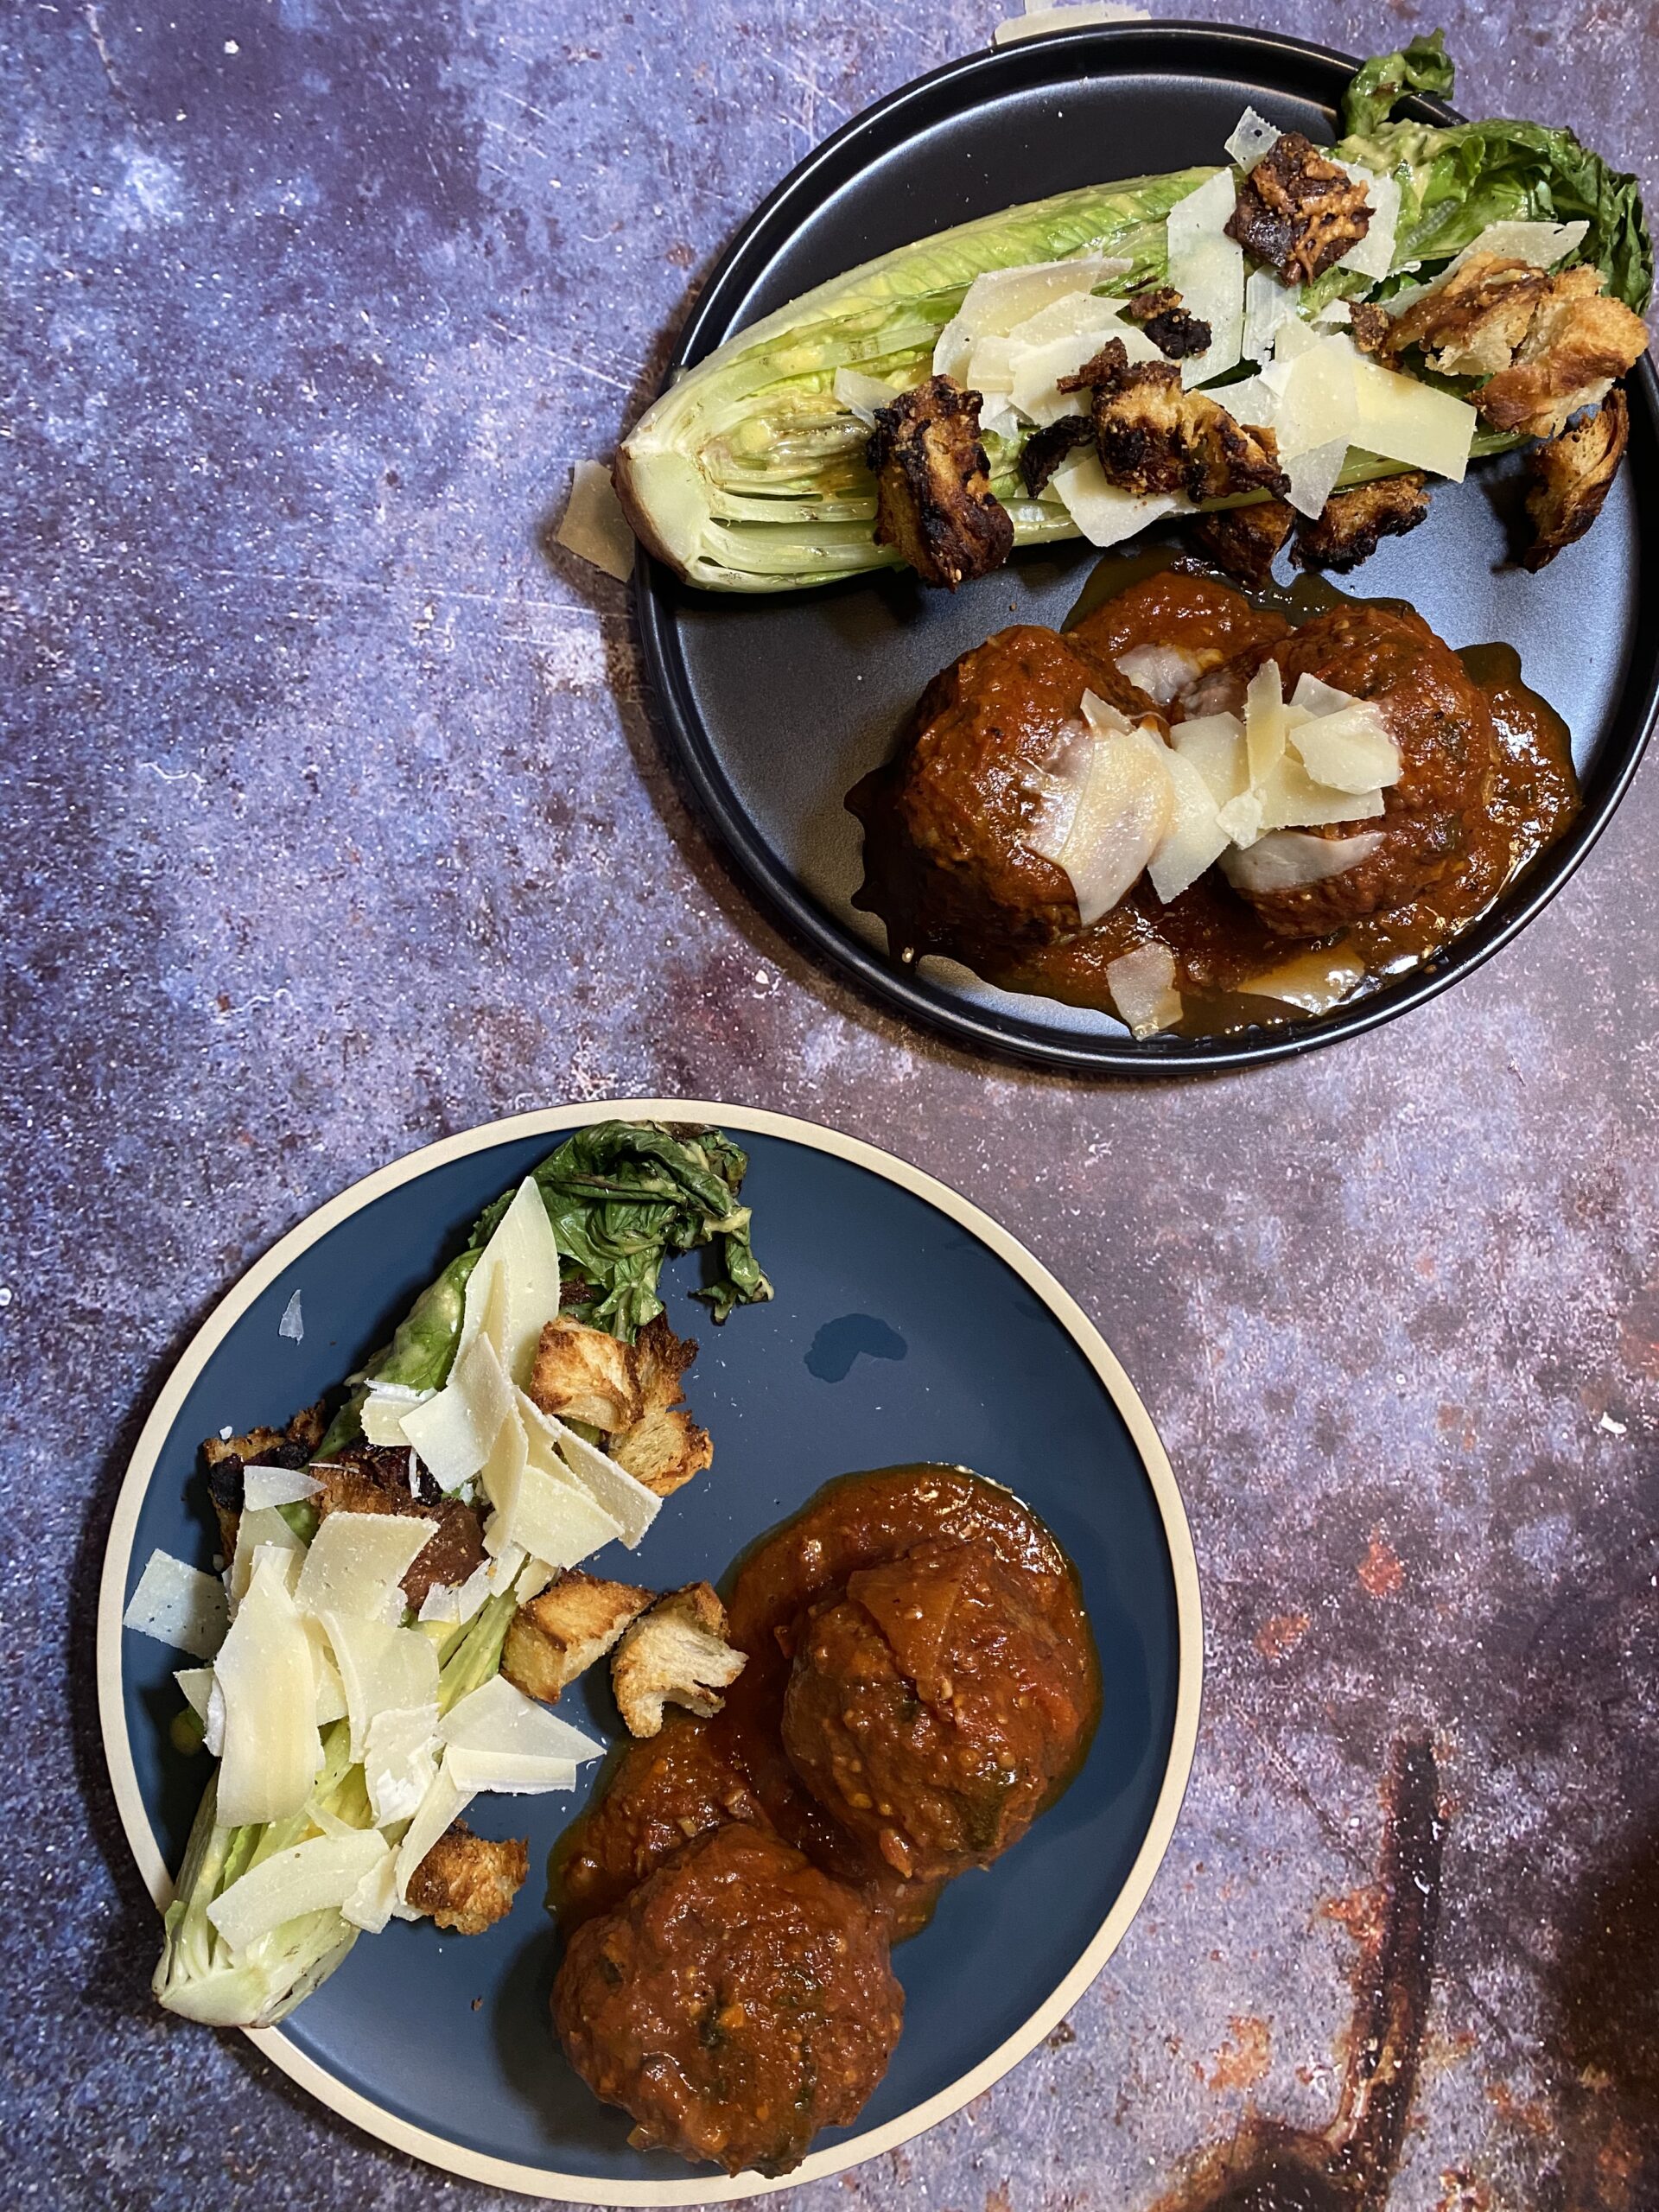 2CEAAF58 E327 48DC BB08 F39E57C99CA0 scaled - The Best Sunday Meatballs with Grilled Romaine